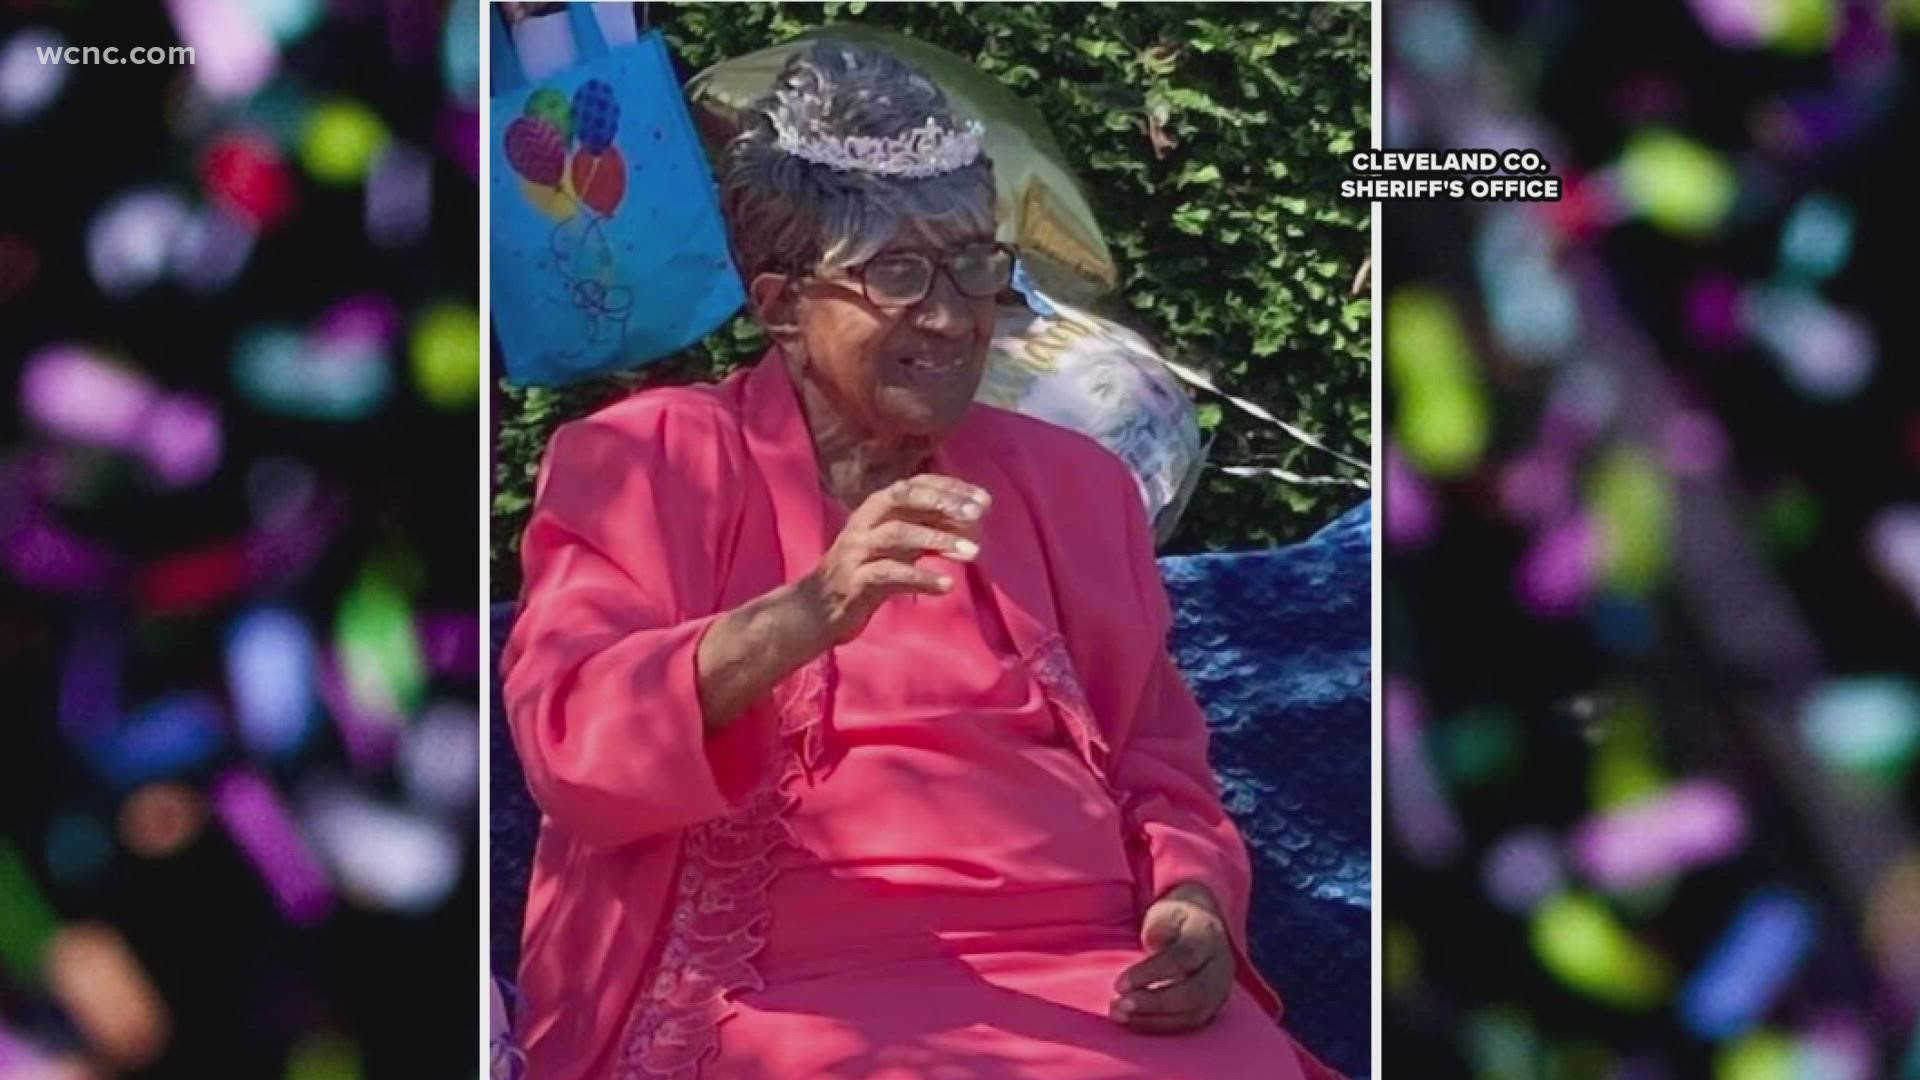 She turned 106 on Monday, and the Cleveland County Sherriff's Office shared pictures of her birthday celebration.